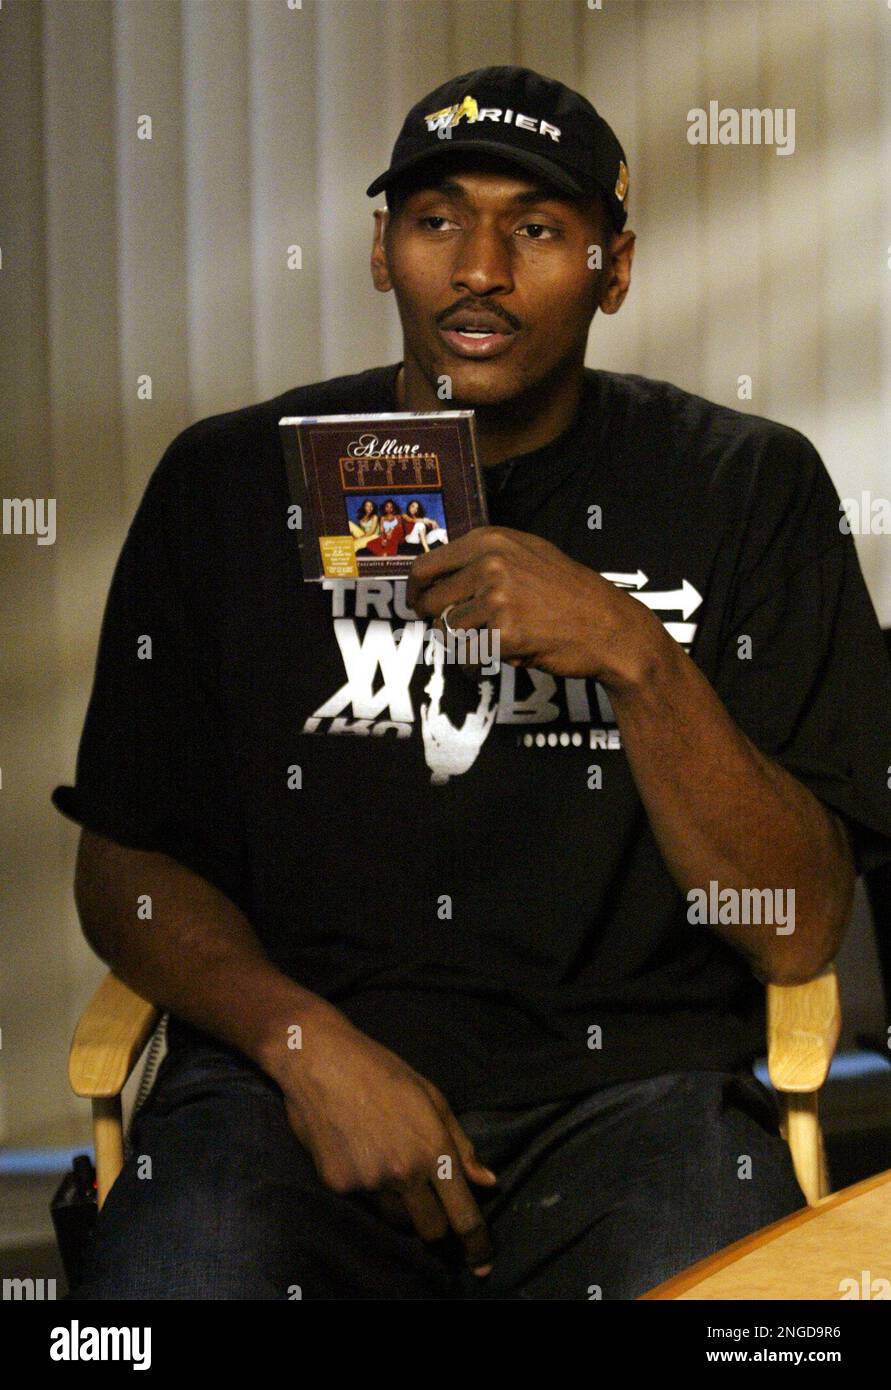 Suspended Indiana Pacers player Ron Artest holds up a copy of a CD he is promoting during a MSNBC interview at an Indianapolis radio station Tuesday, Nov. 23, 2004. Artest was suspended for the rest of the season for fighting with a fan at the end of a game with the Detroit Pistons last Friday. (AP Photo/Tom Strattman) Stock Photo